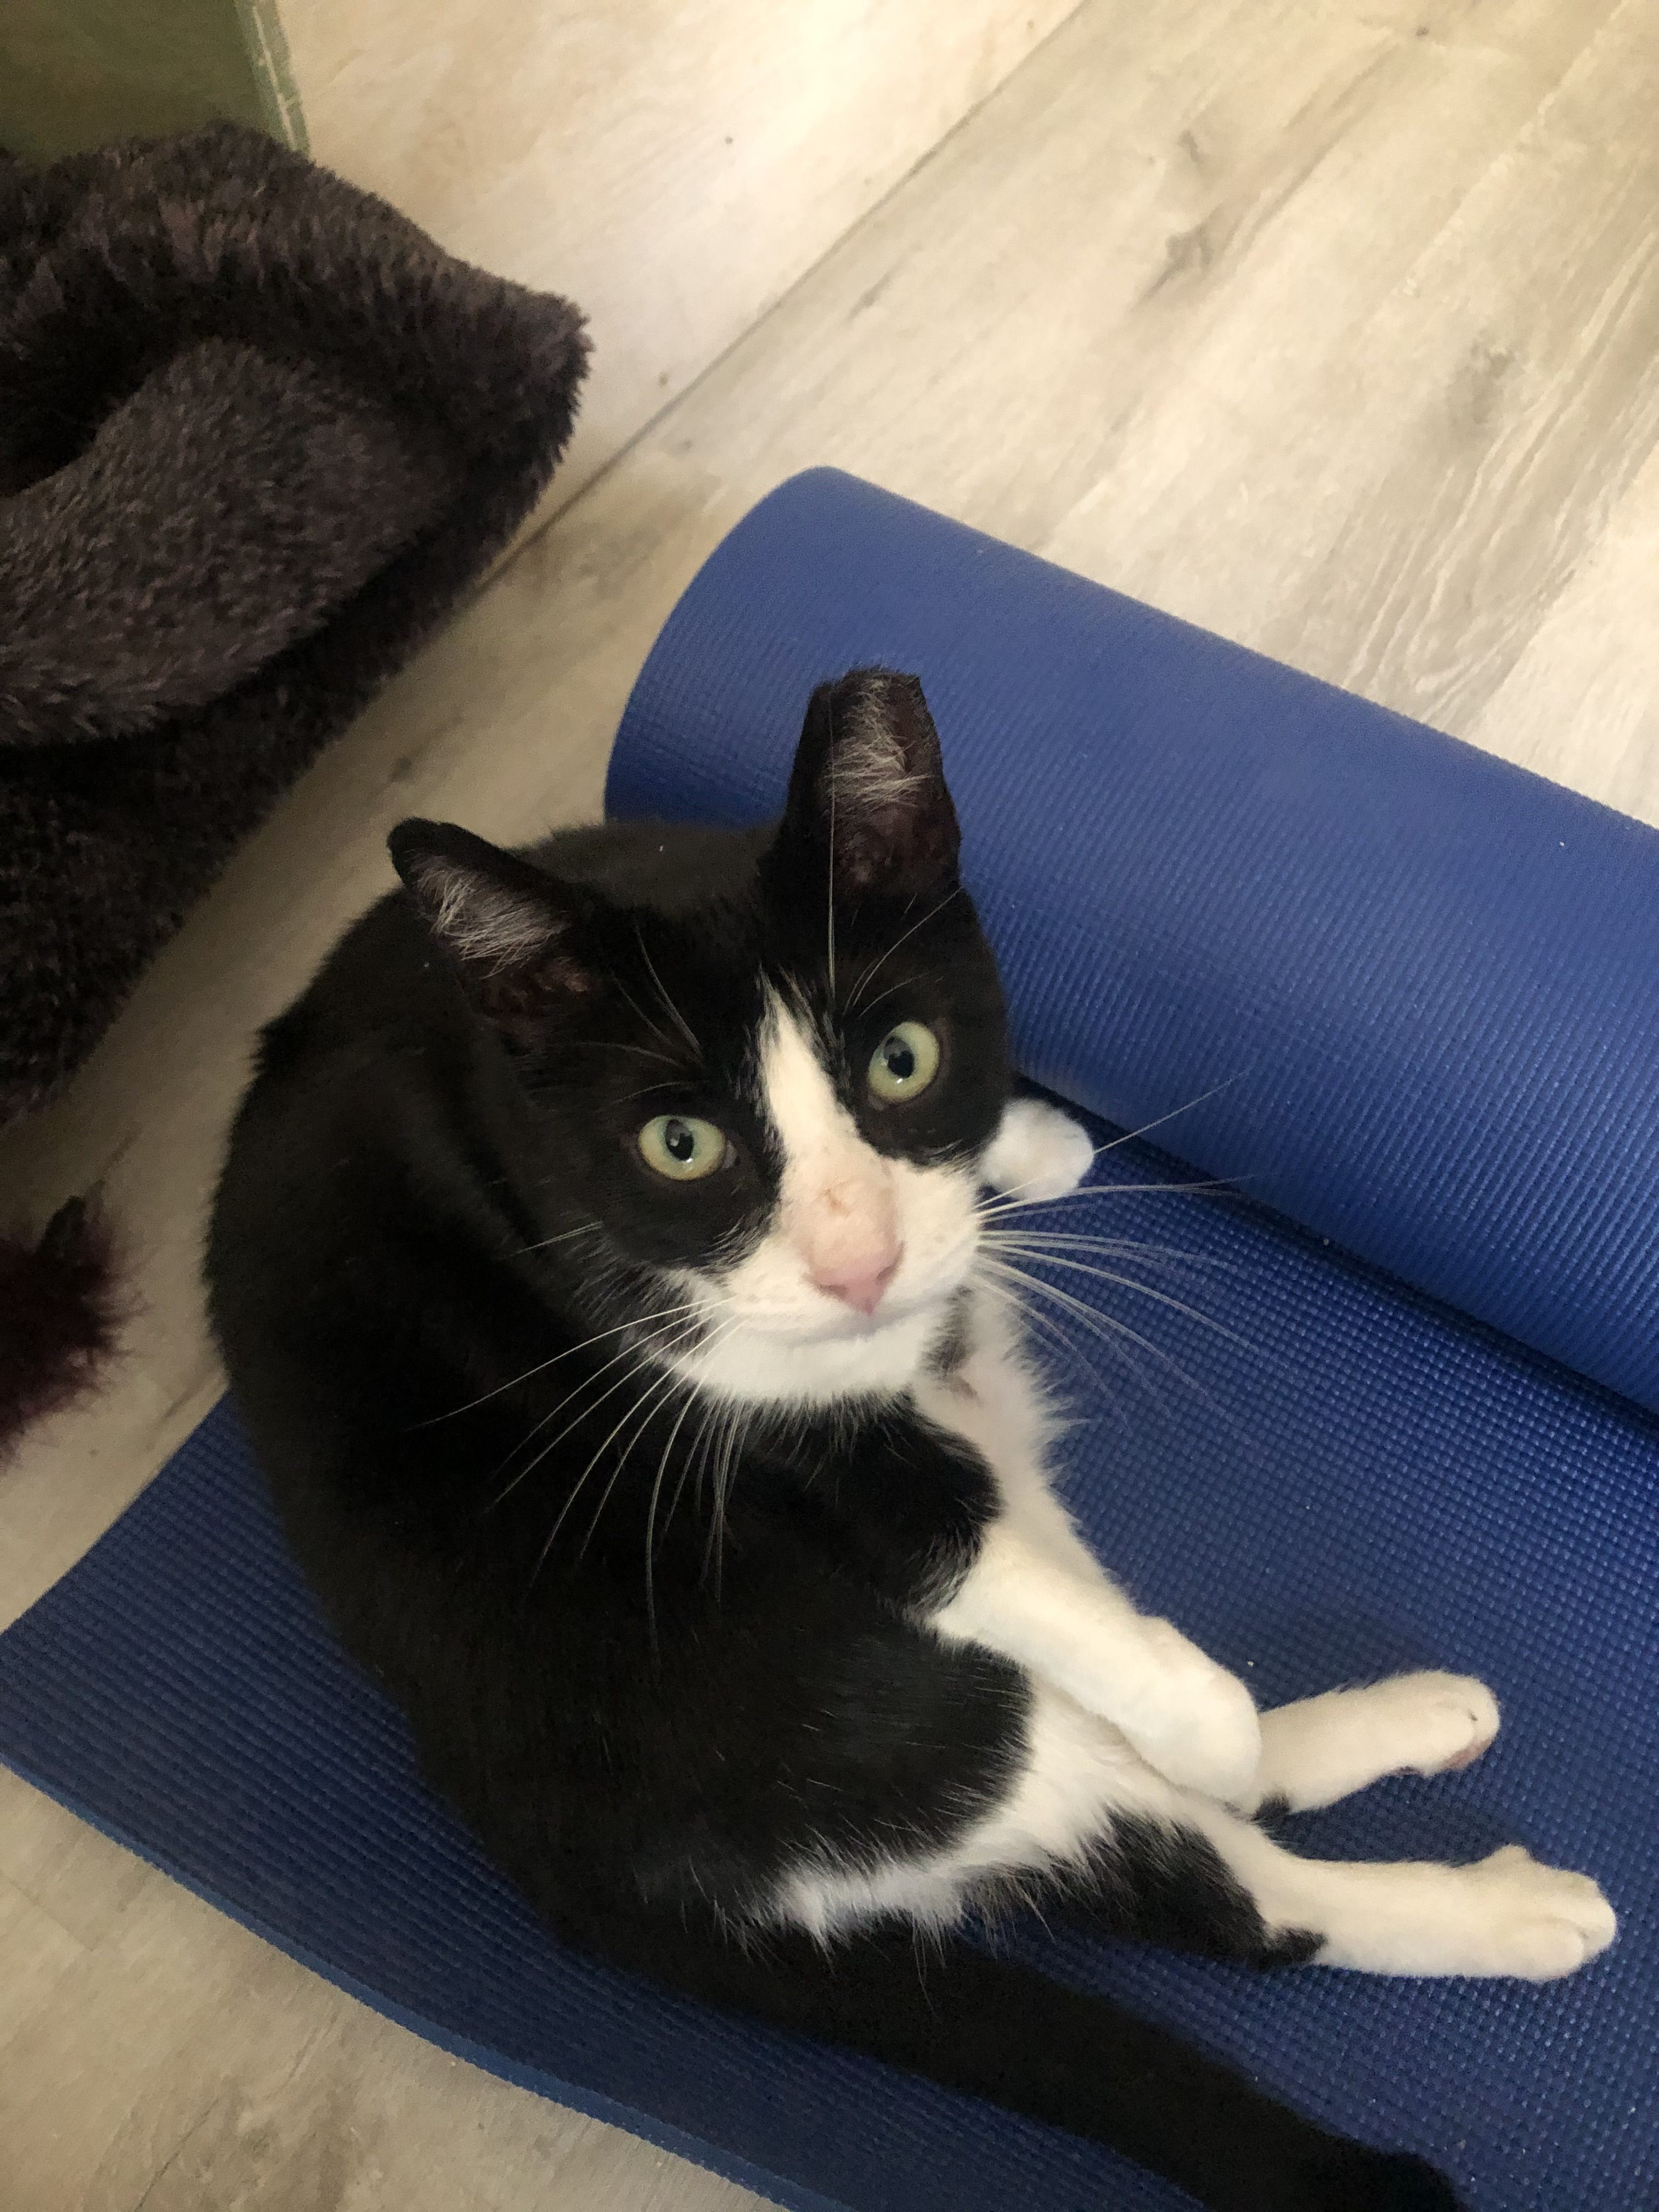 Hero Kitty also likes to share the yoga mat